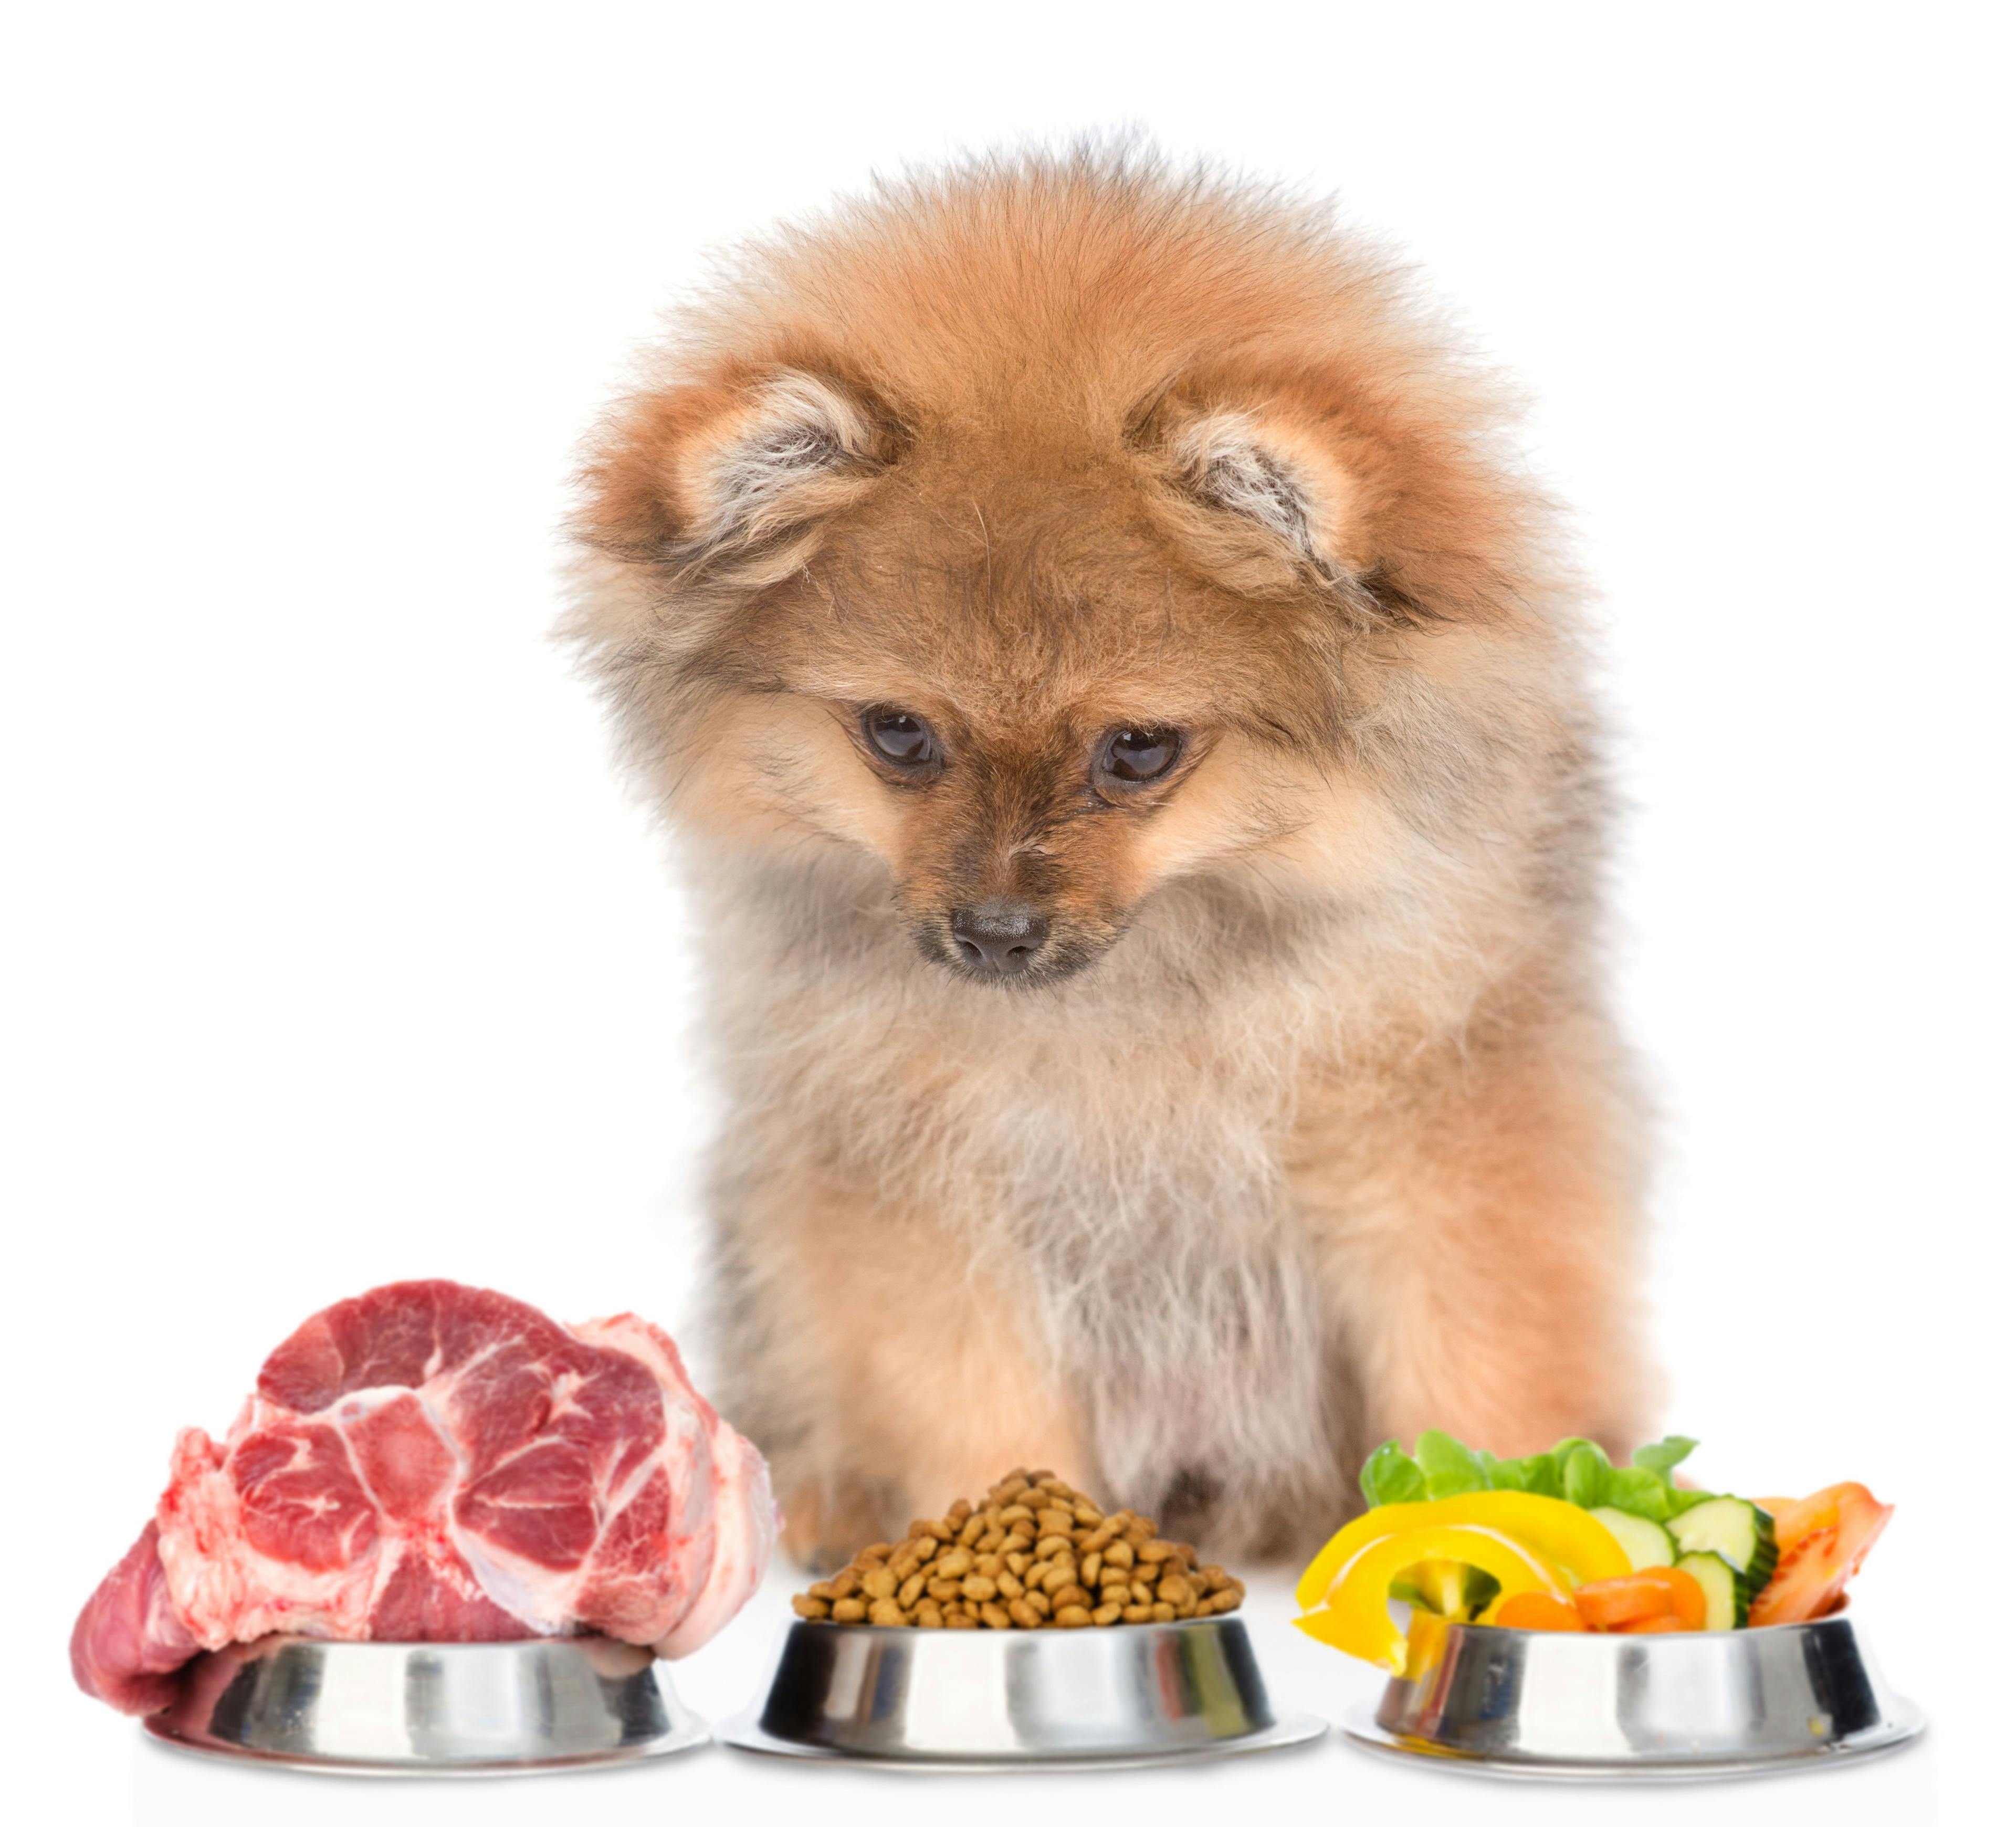 Fact or fiction? Debunking common pet food myths